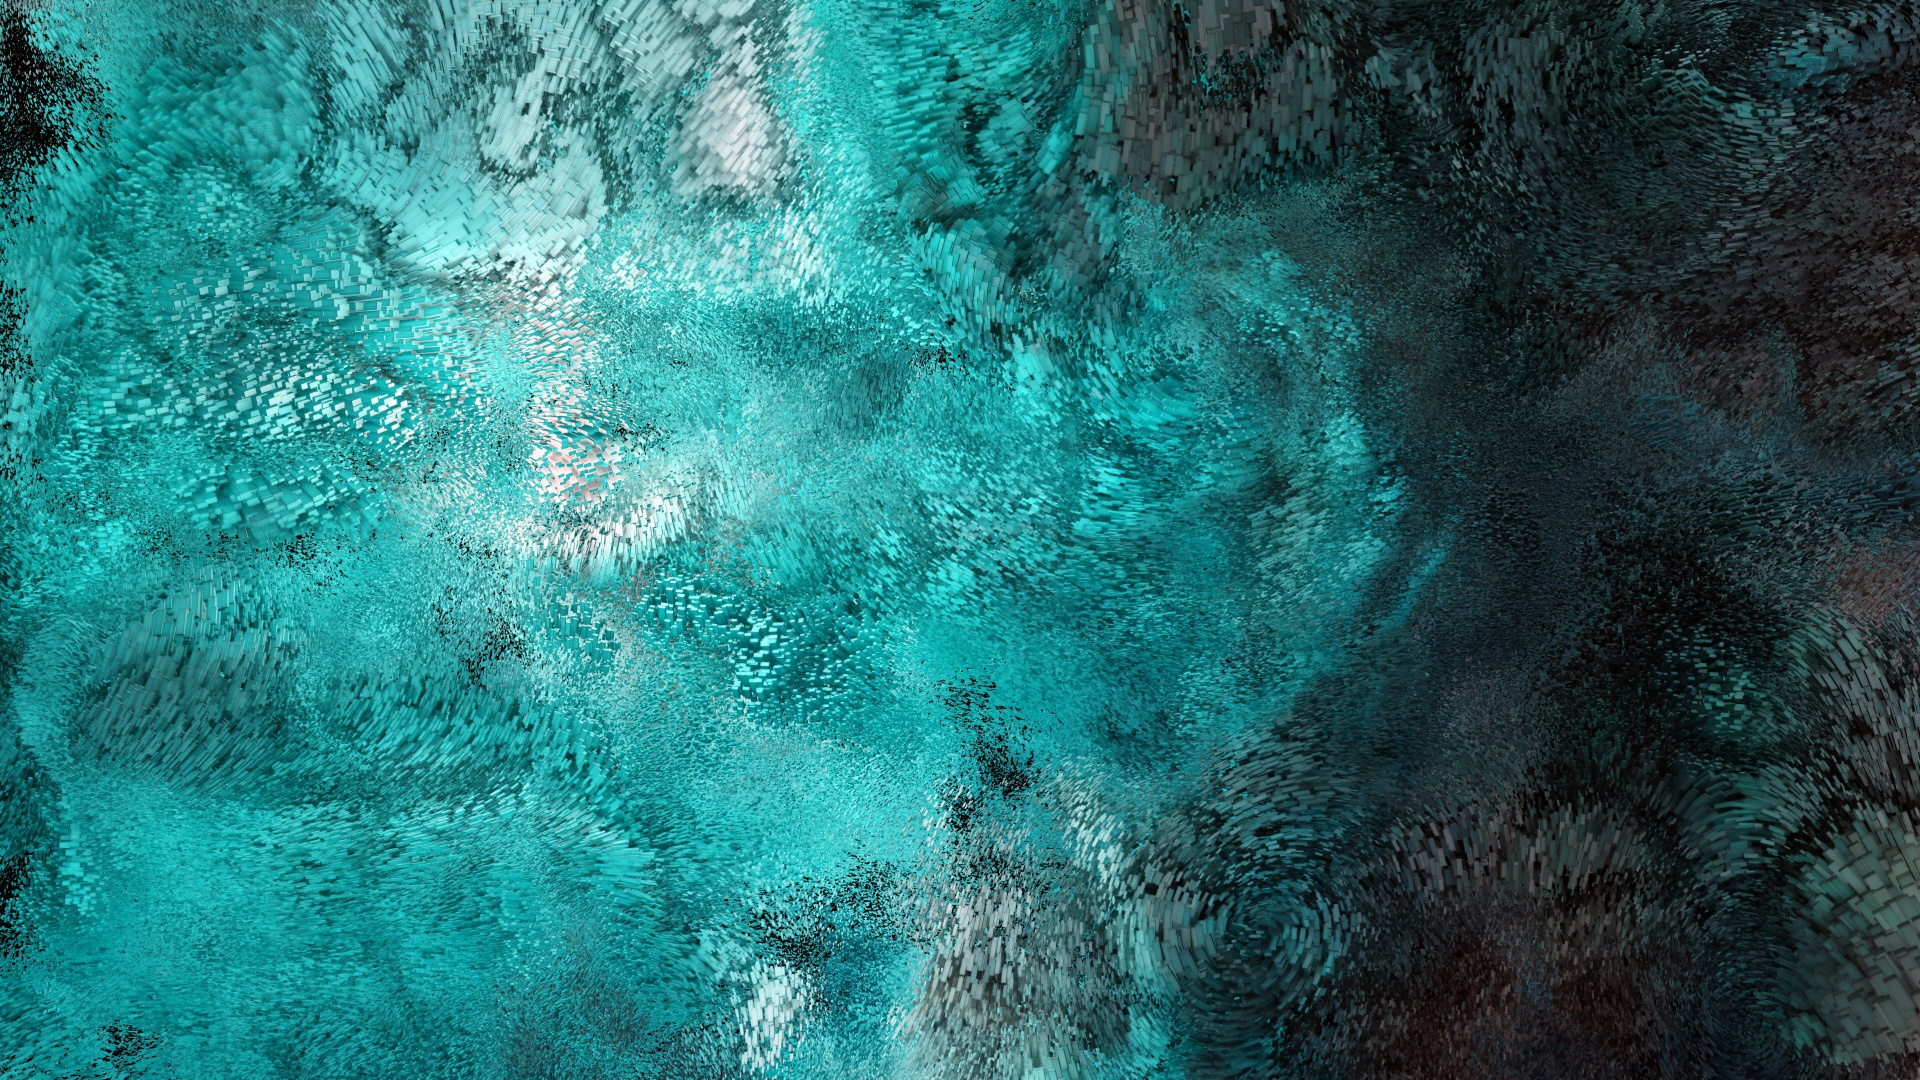 Swarm Wallpaper 4K, Particles, Turquoise, Teal, Abstract, #3879